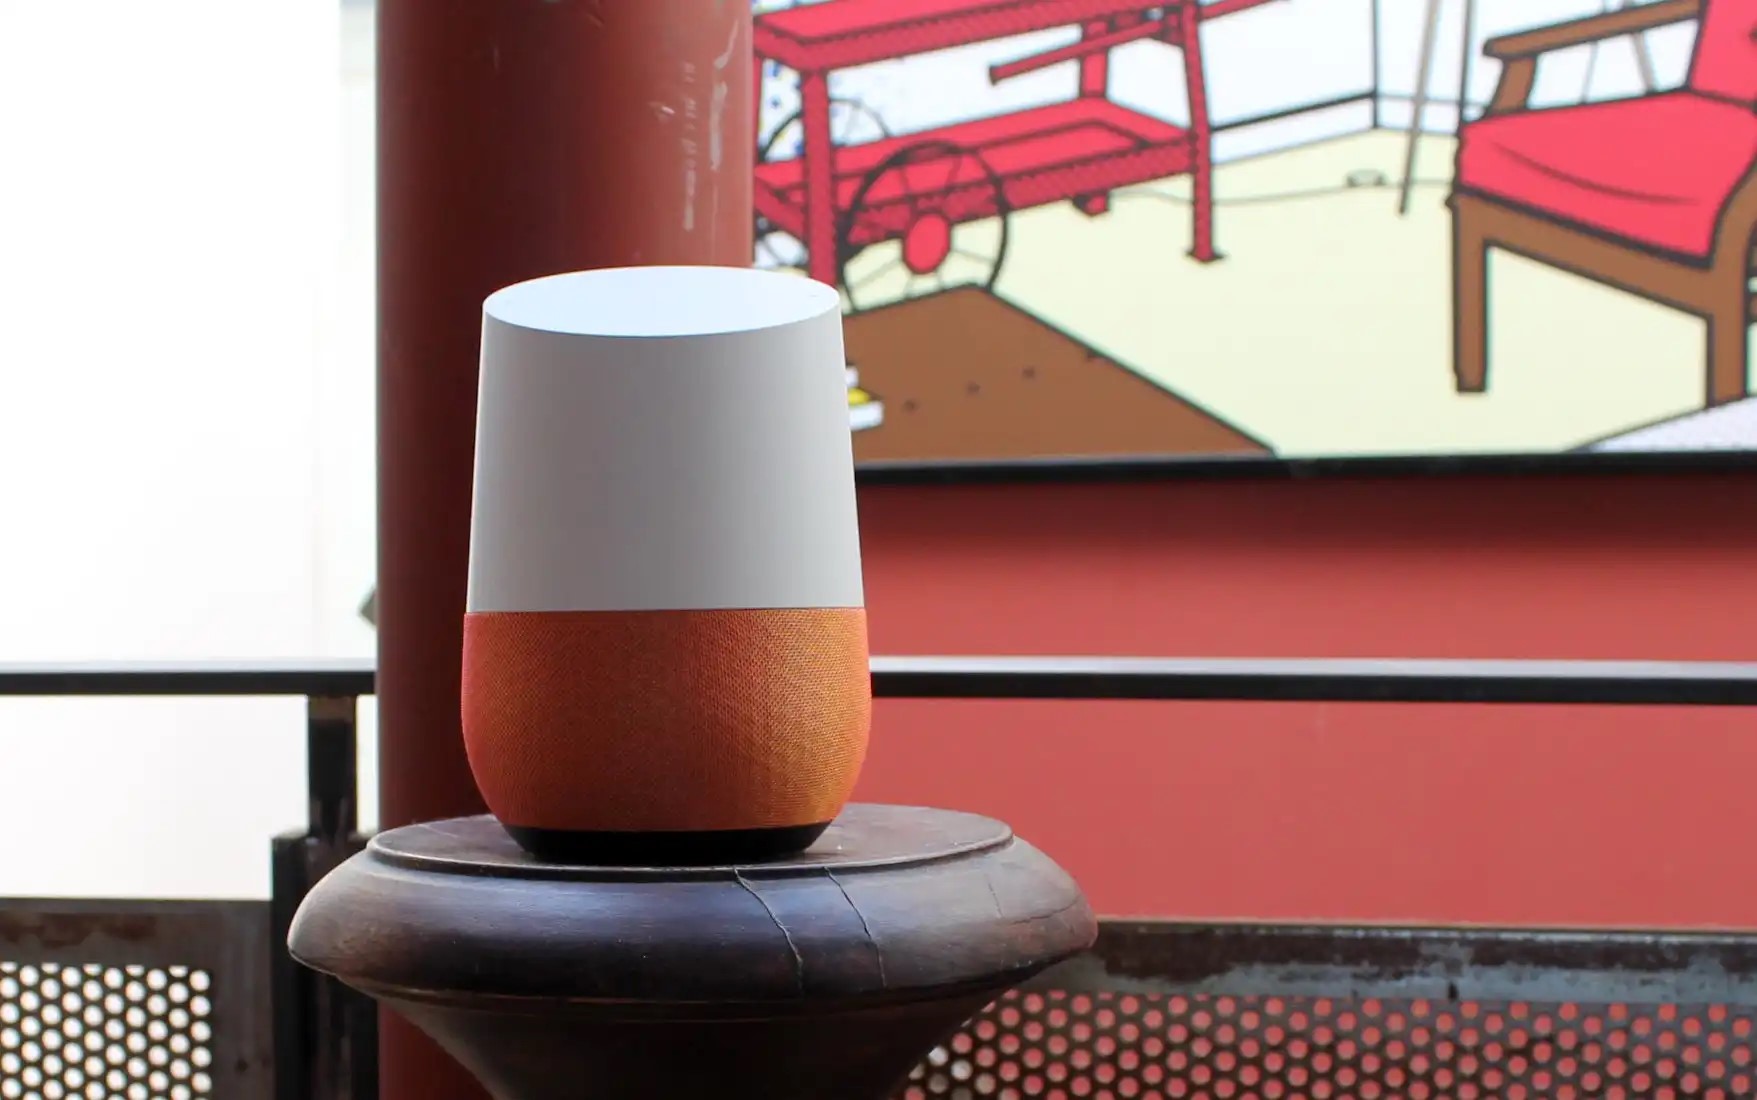 What To Do With Google Home